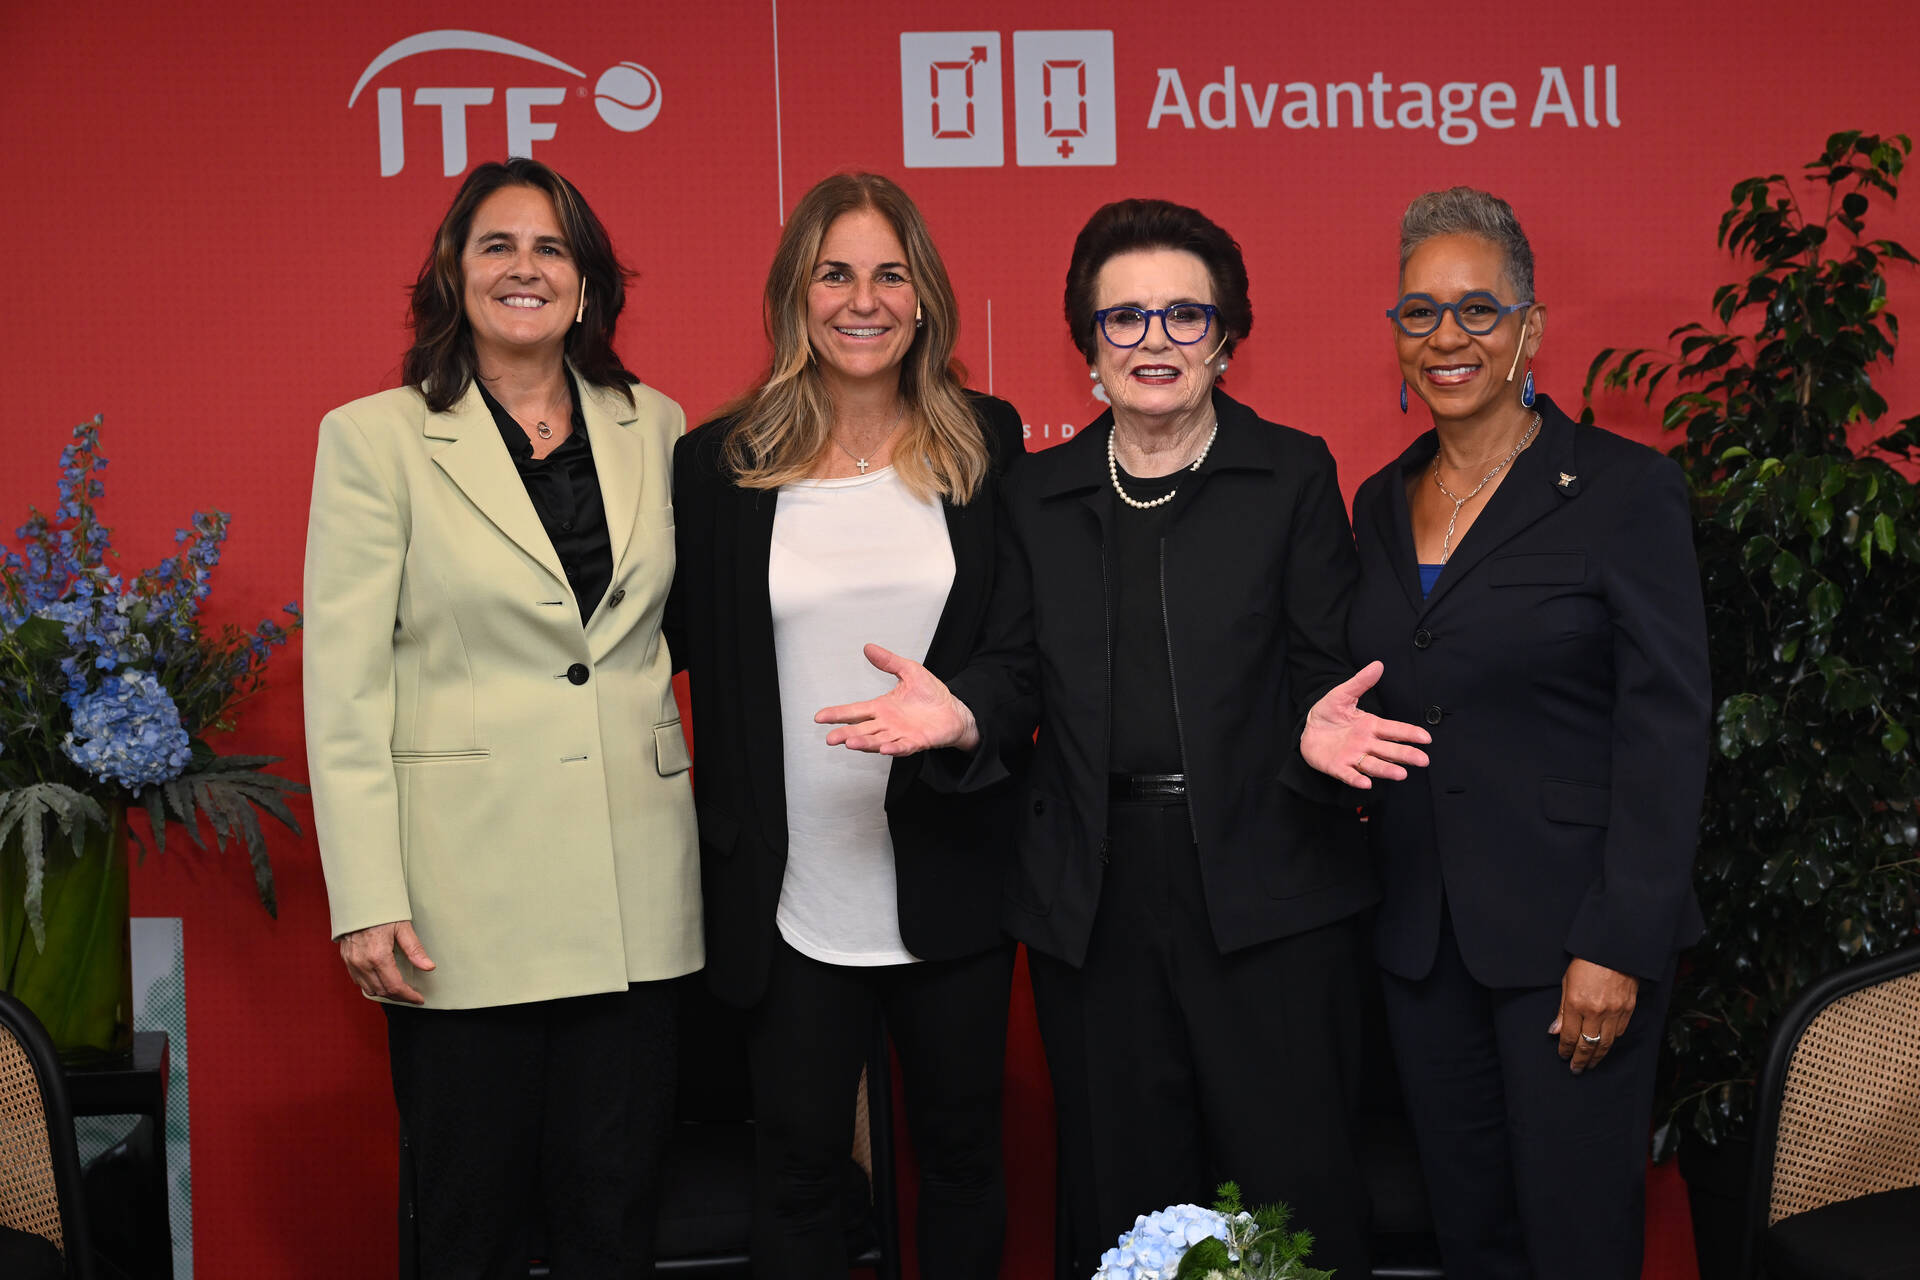 Tennis icons and key influencers champion gender equality at ITF Advantage All Forum in Seville